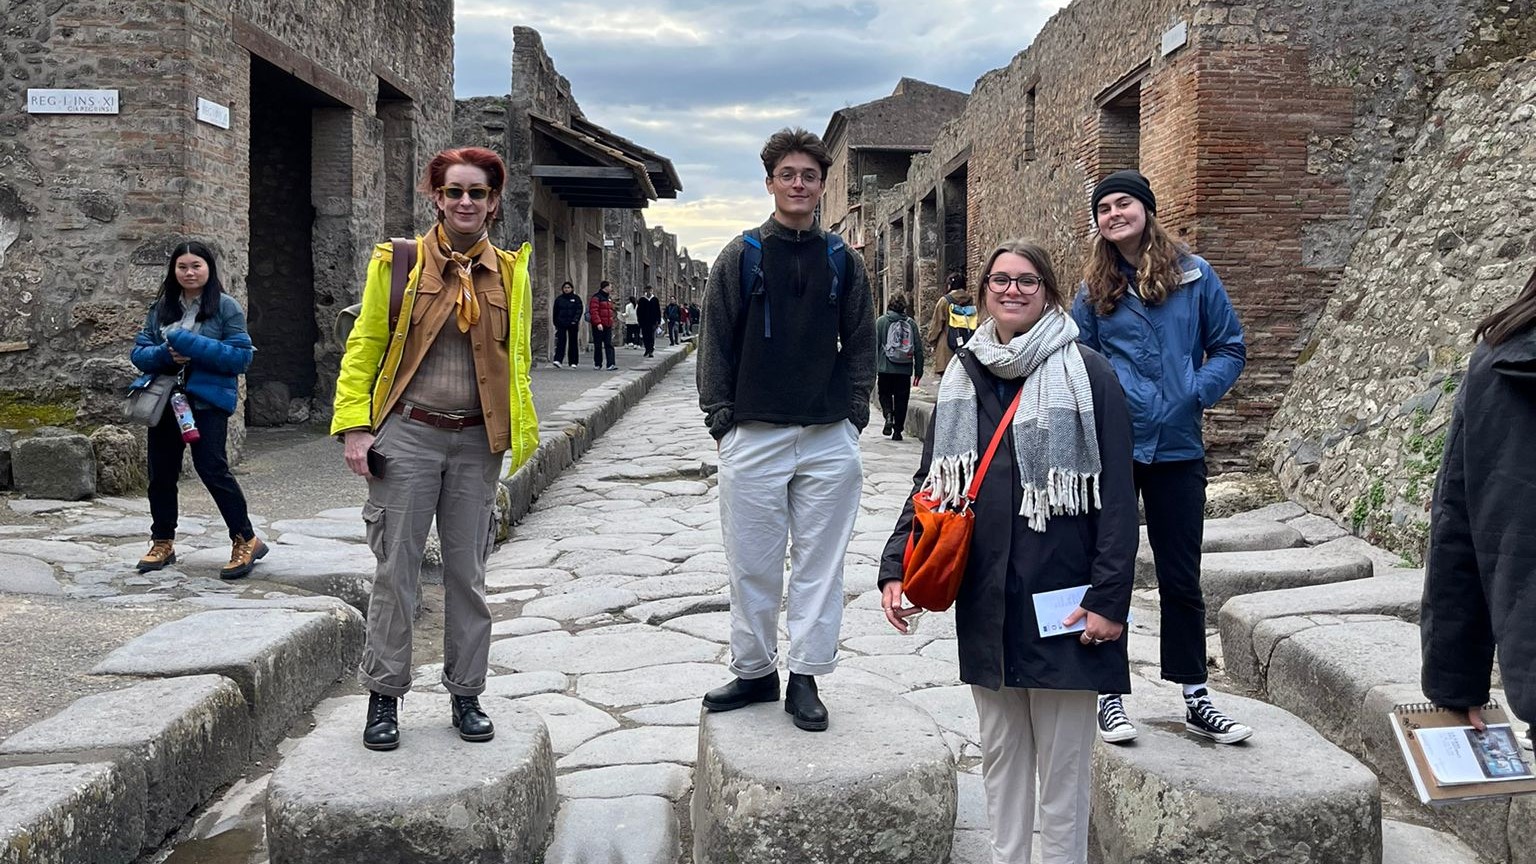 Dr. Regina Gee in Pompeii, Italy, during Field Study abroad class with students. 